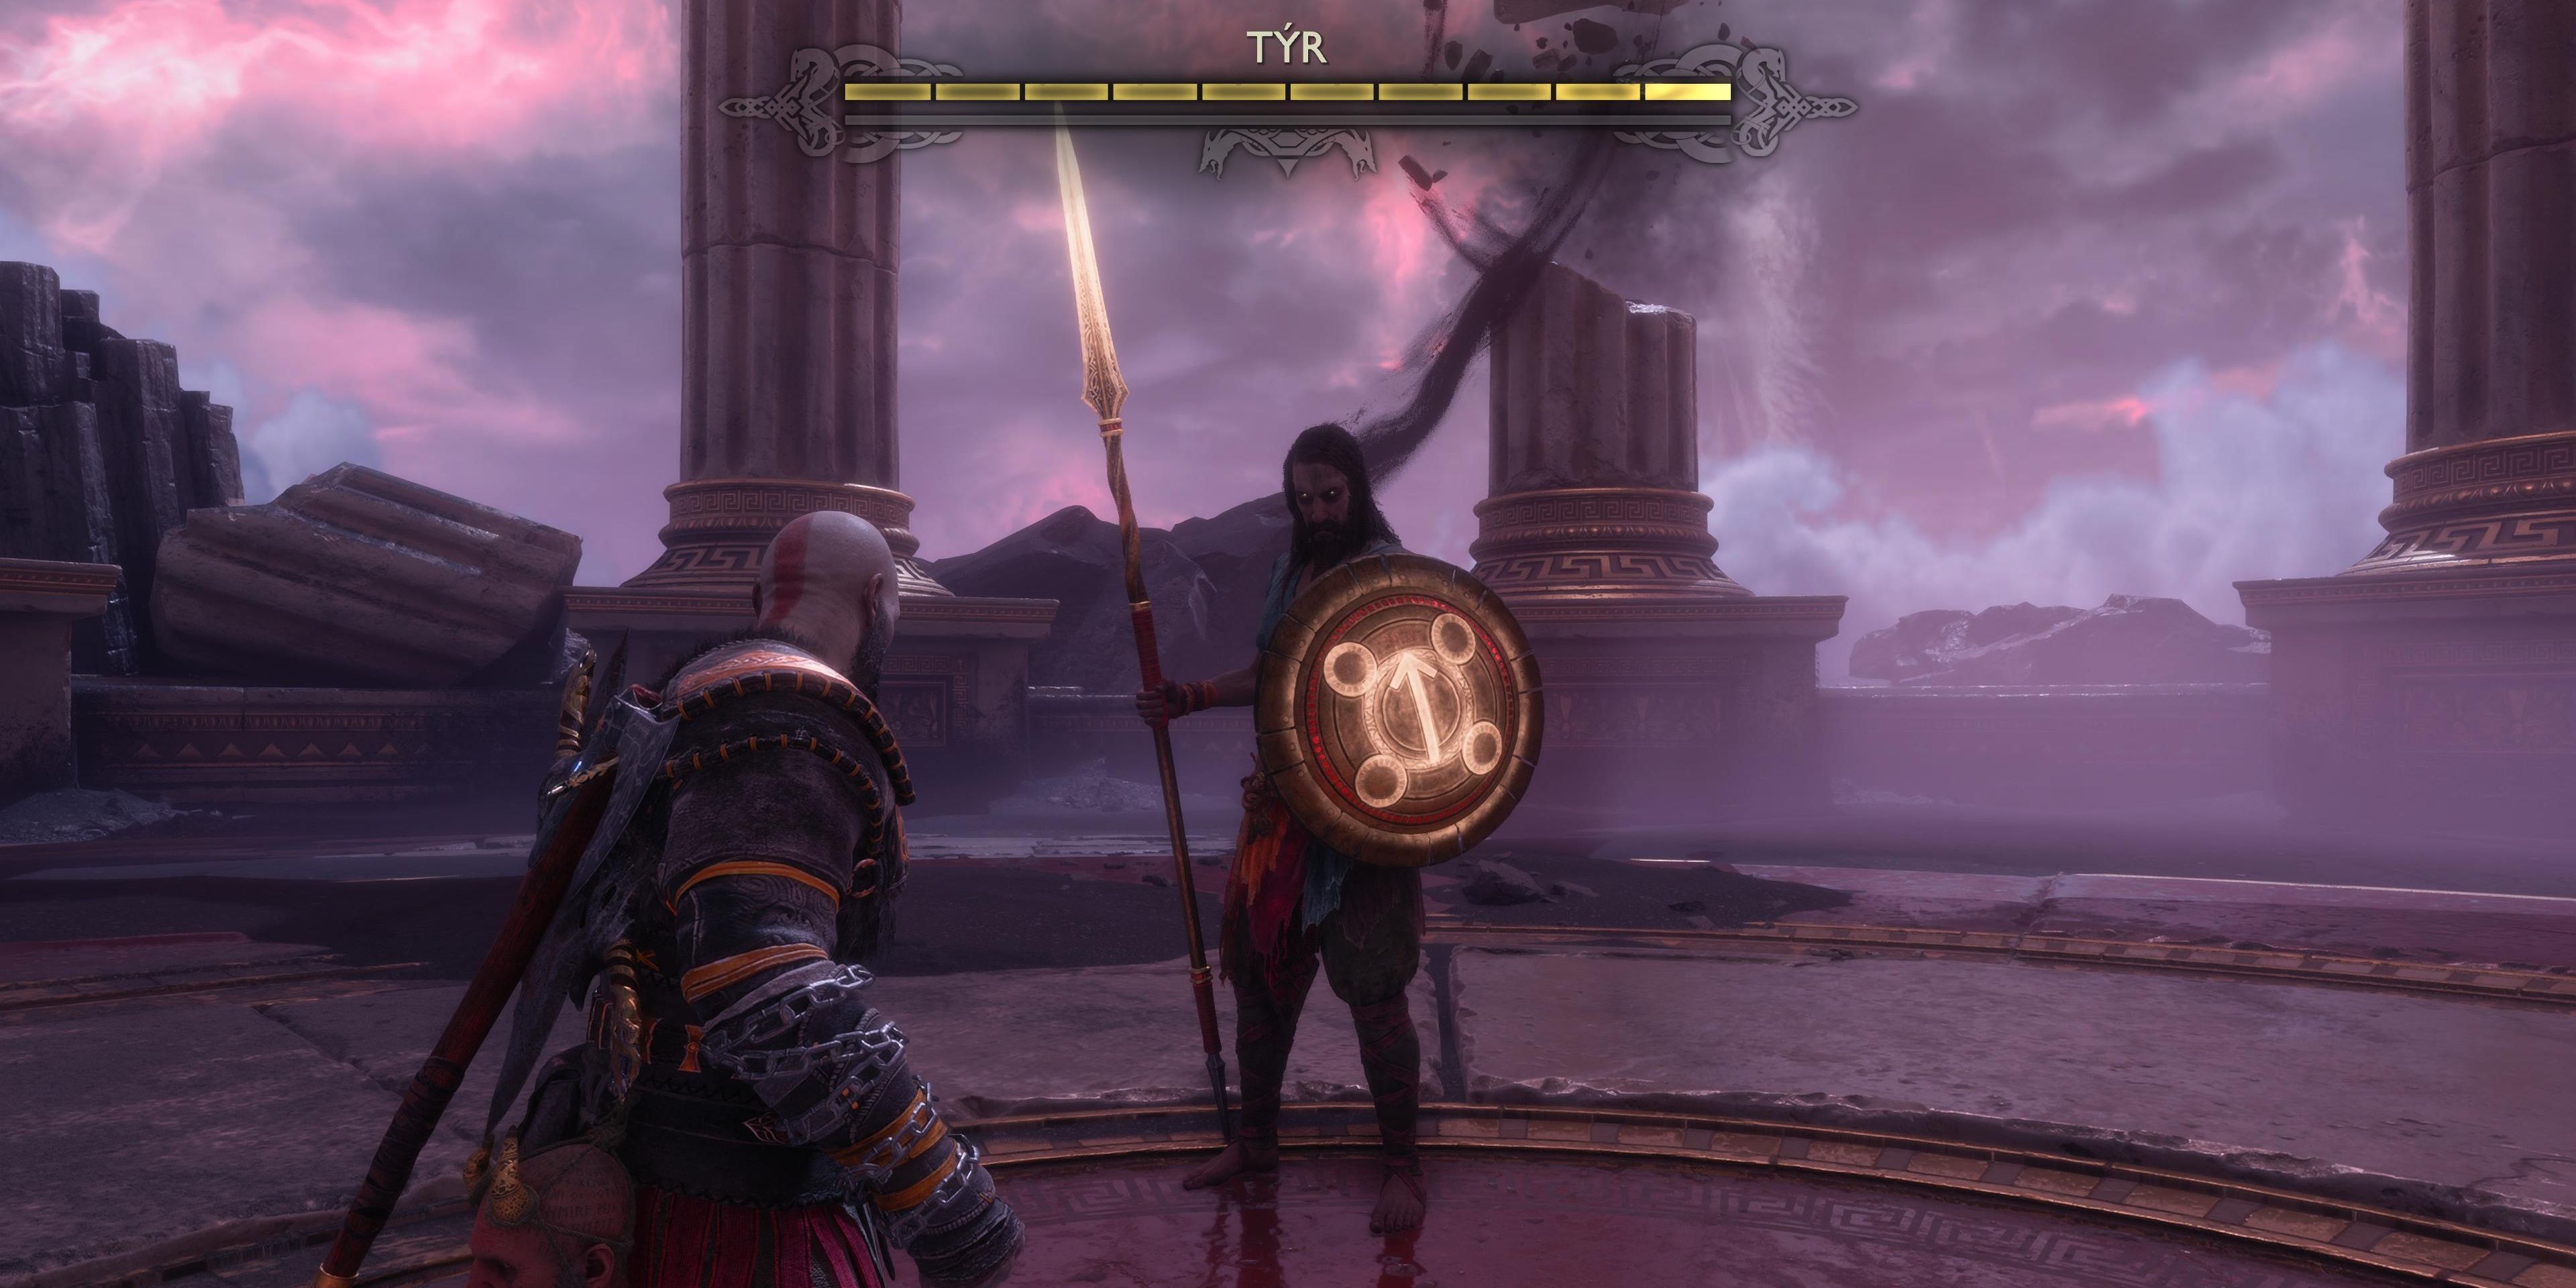 kratos vs tyr who is using a spear and shield